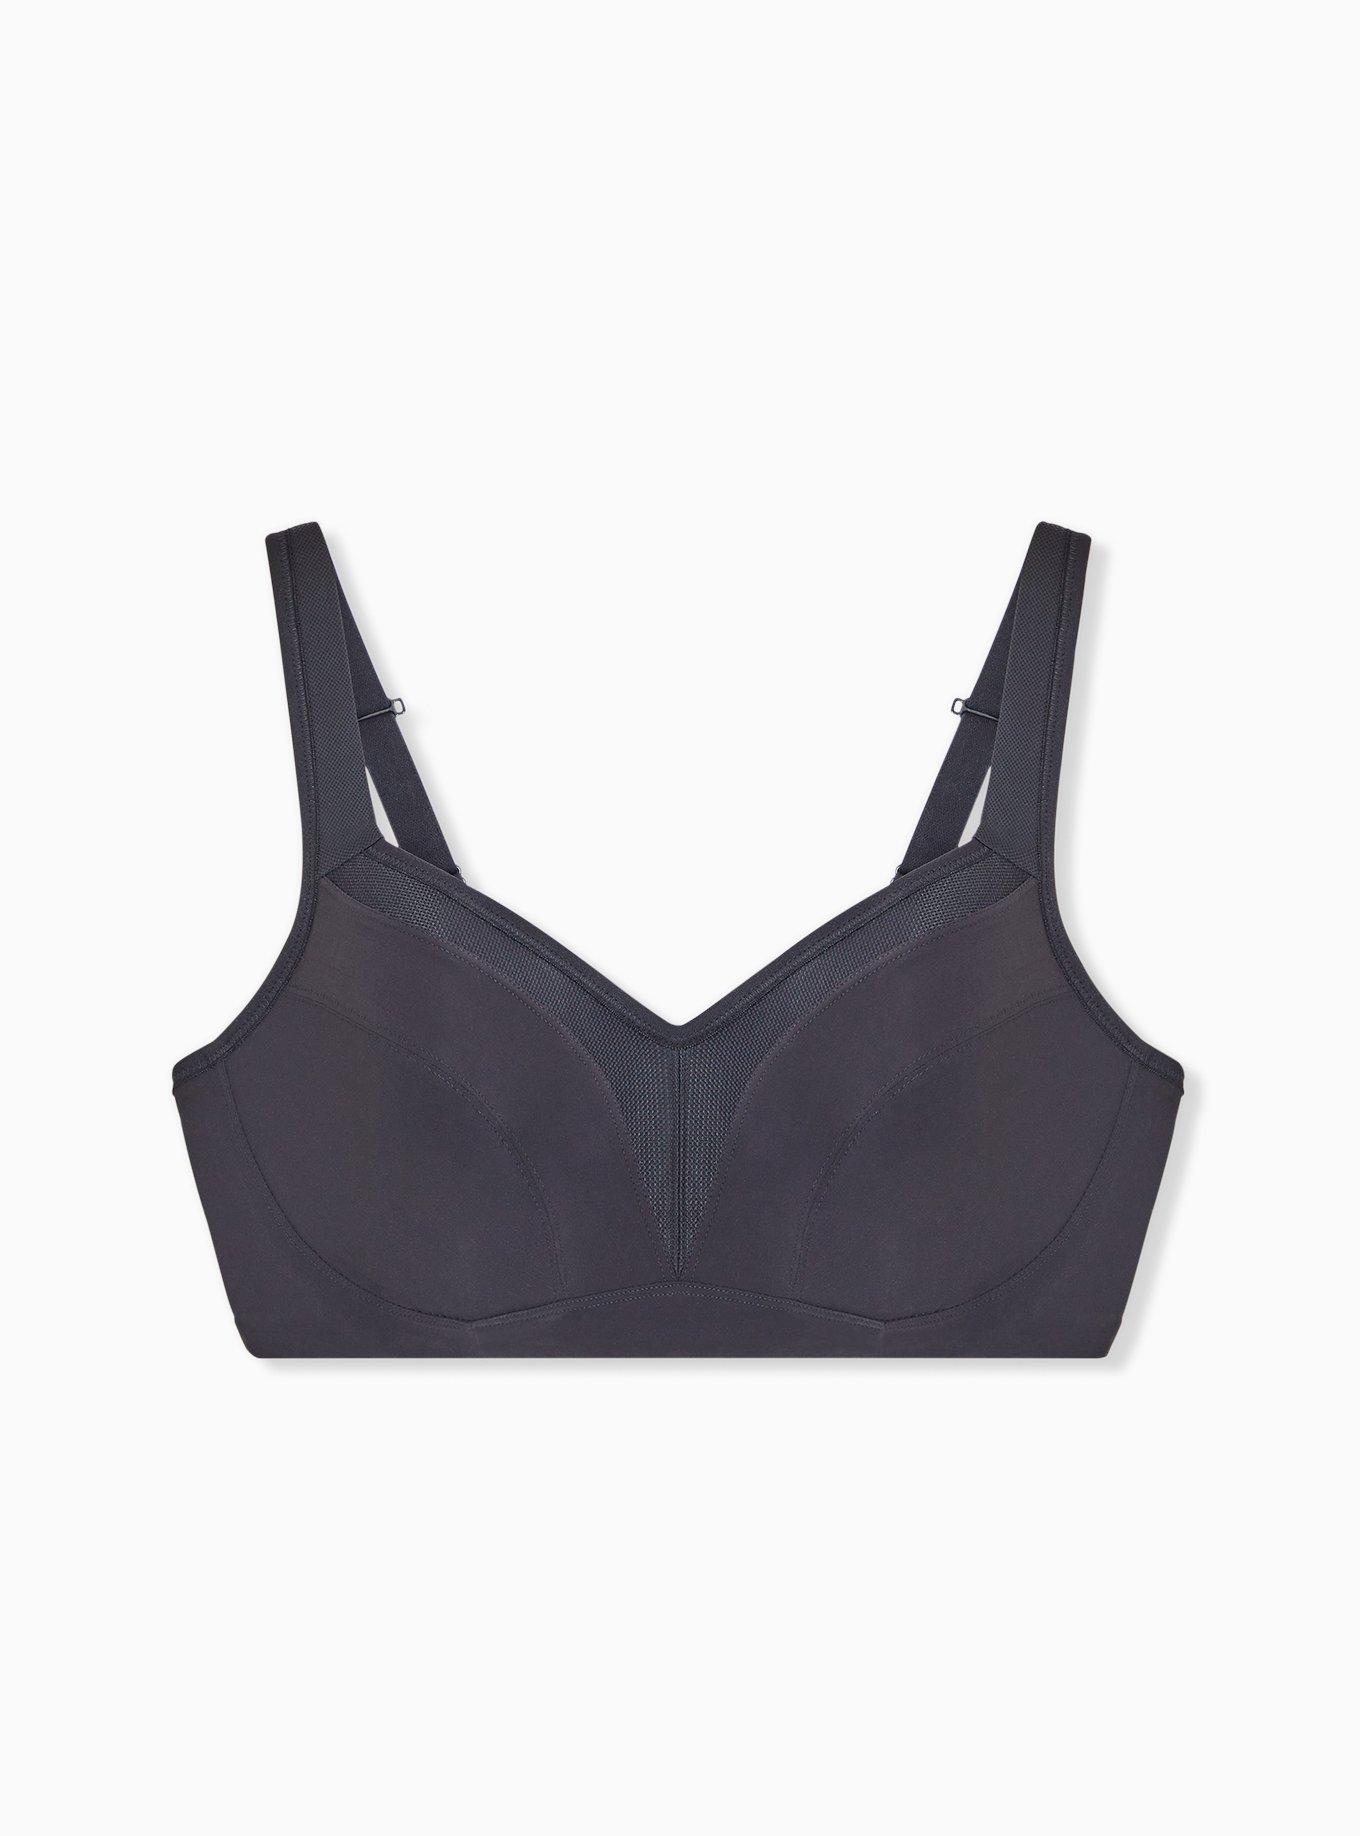 Buy Wacoal Sport Non-Padded Wired Full Coverage Full Support High Intensity  Sports Bra - Black Online